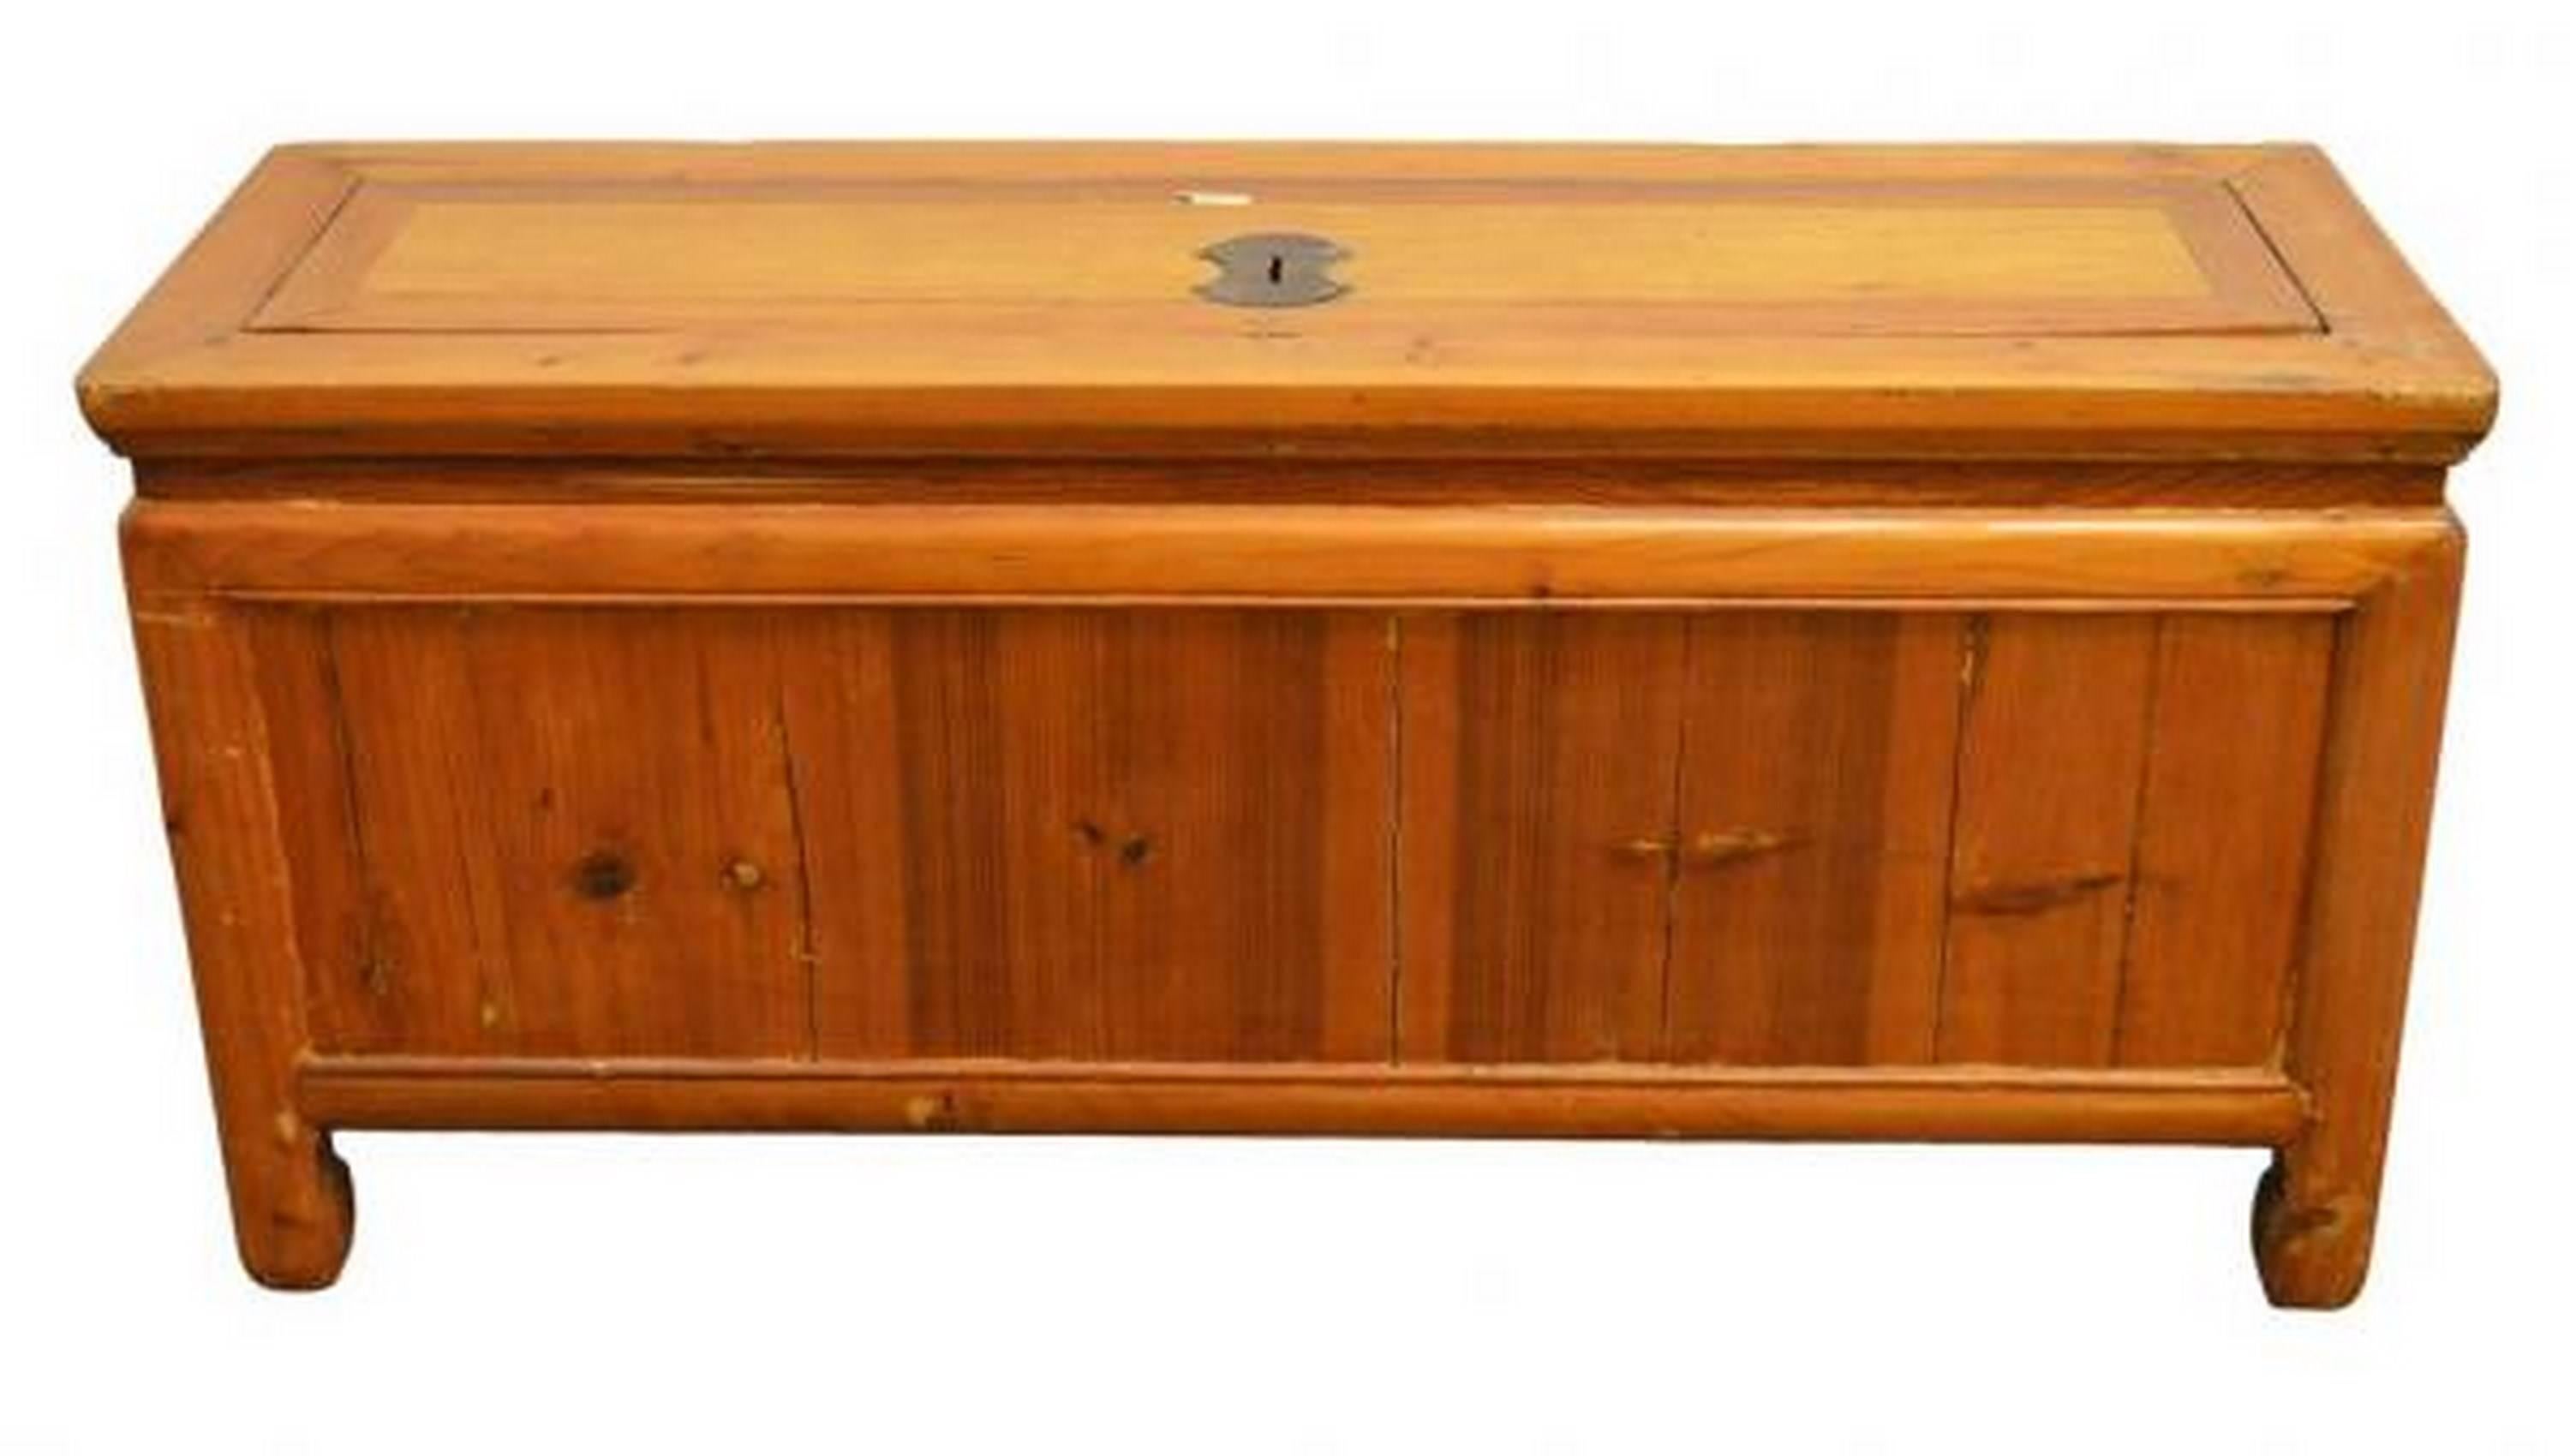 Chinese Antique Low Kang Chest with a Natural Patina from 19th Century China For Sale